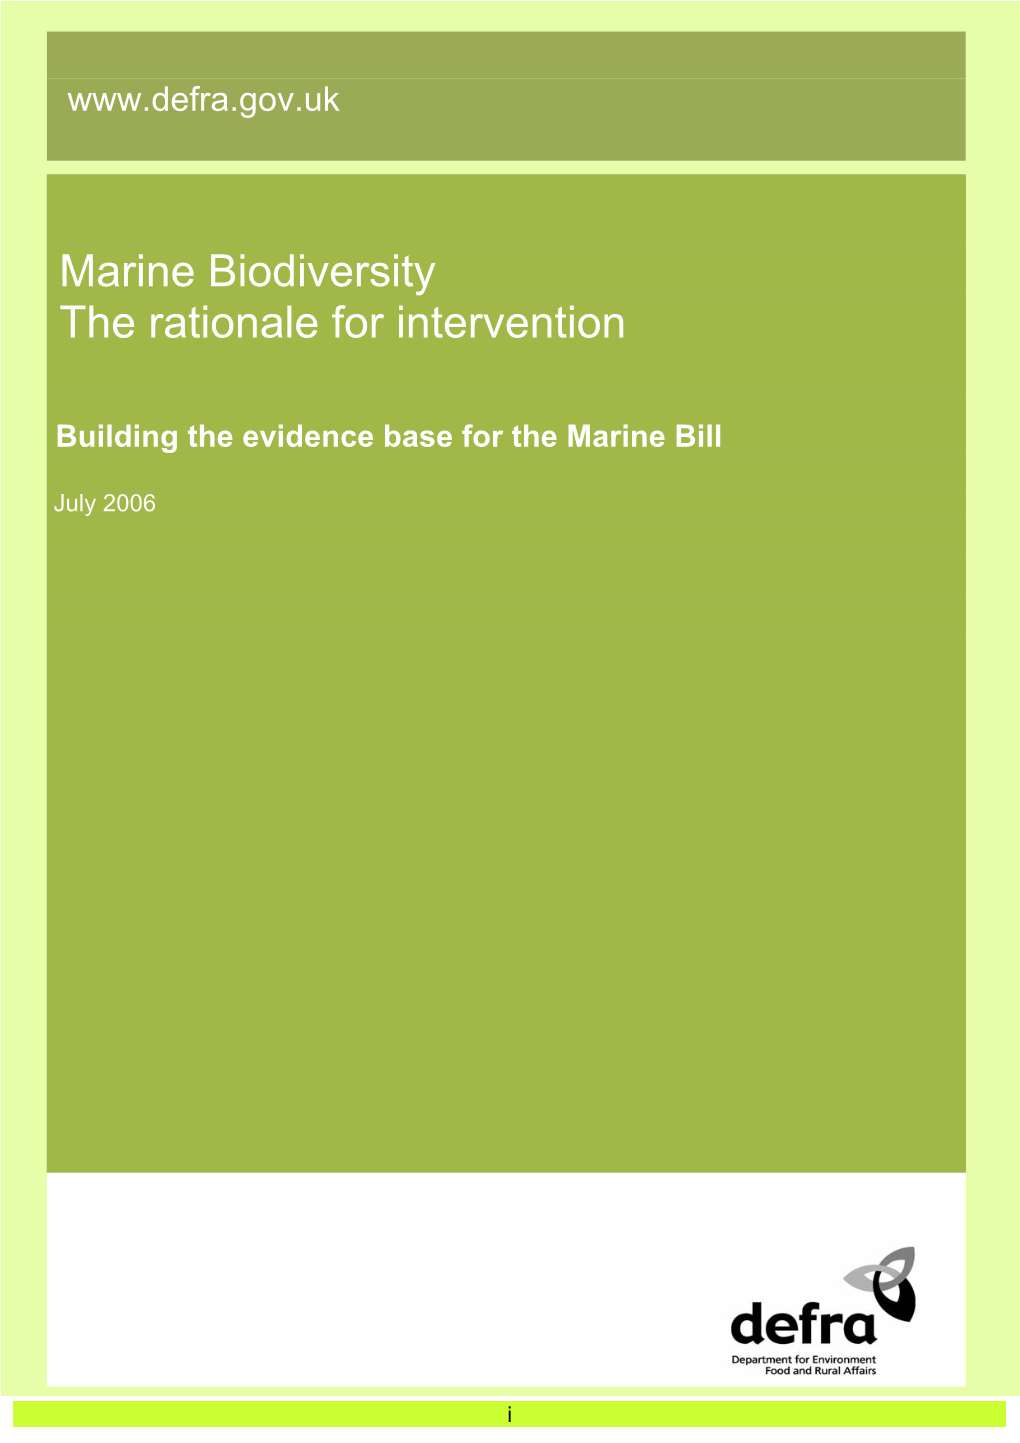 Marine Biodiversity the Rationale for Intervention